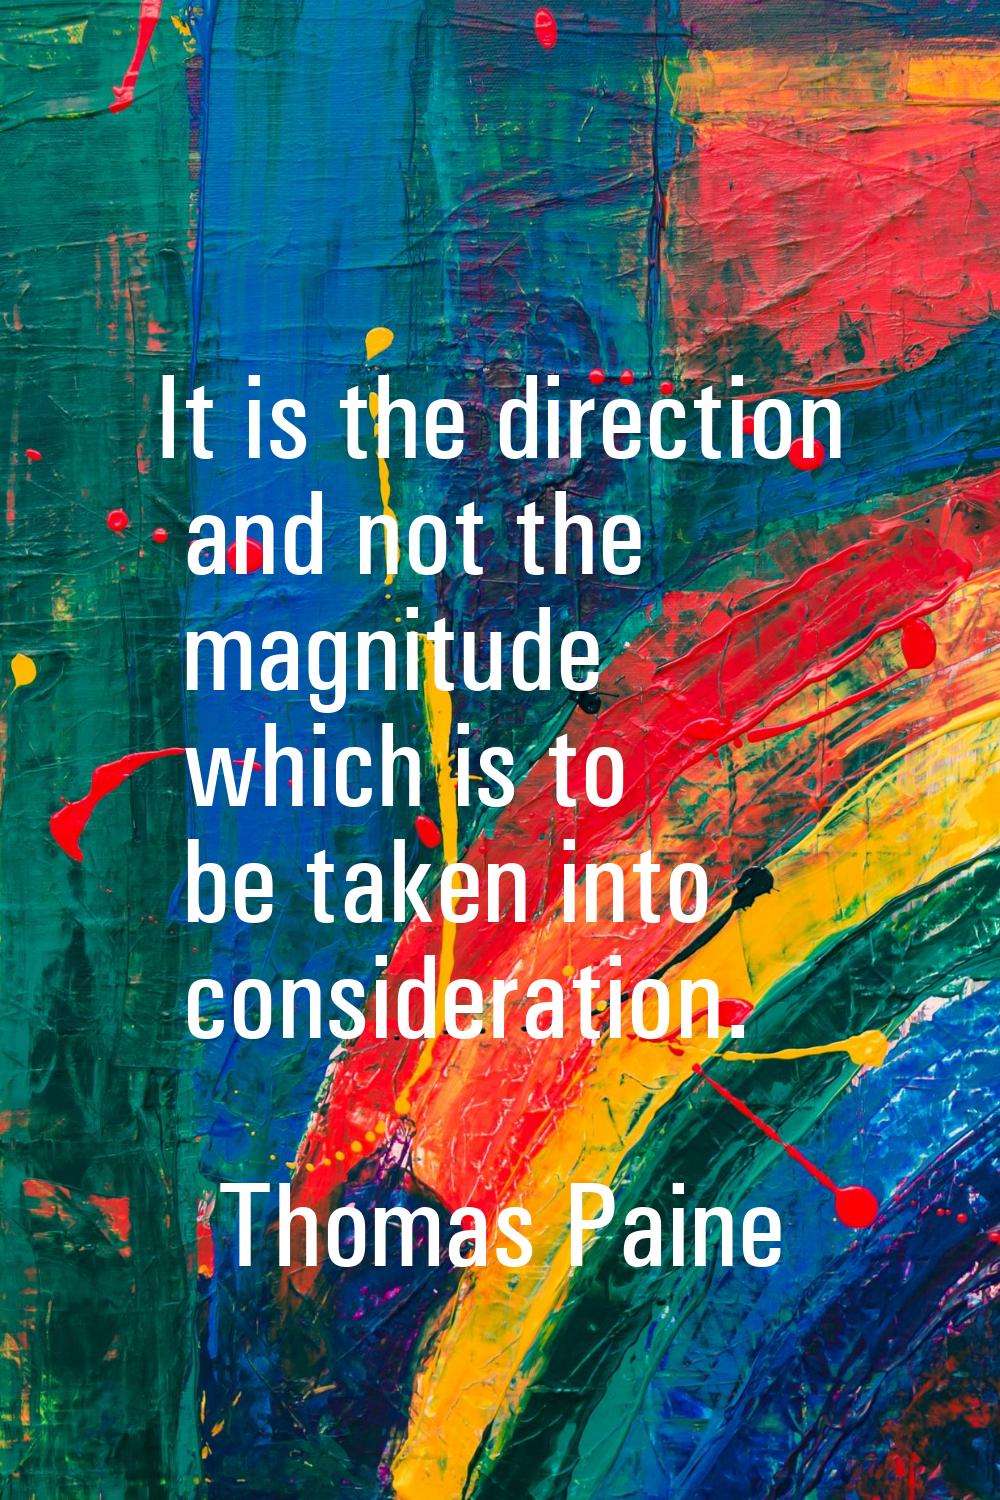 It is the direction and not the magnitude which is to be taken into consideration.